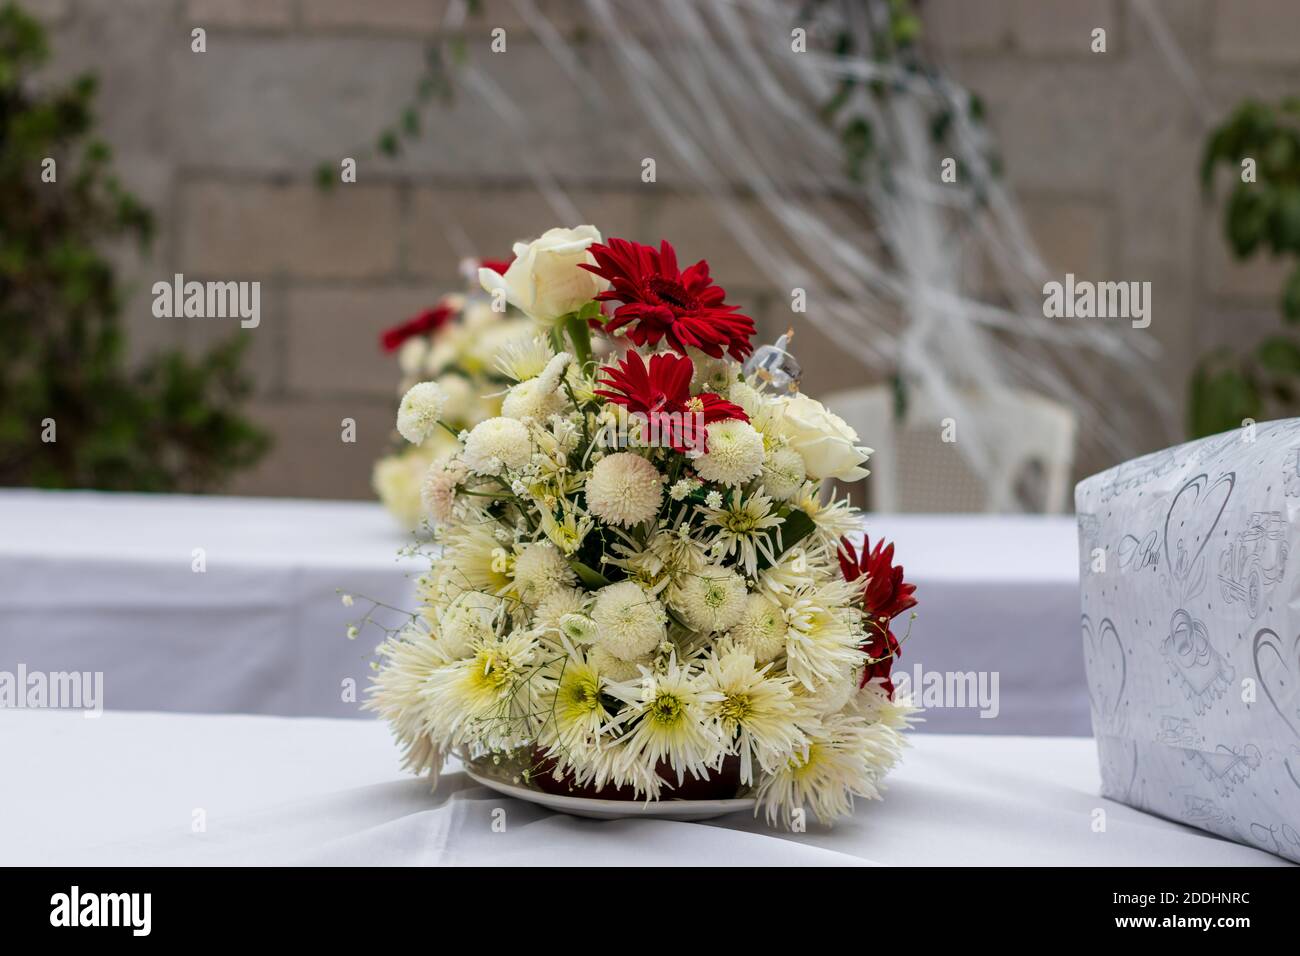 wedding table decorations and ornaments Stock Photo